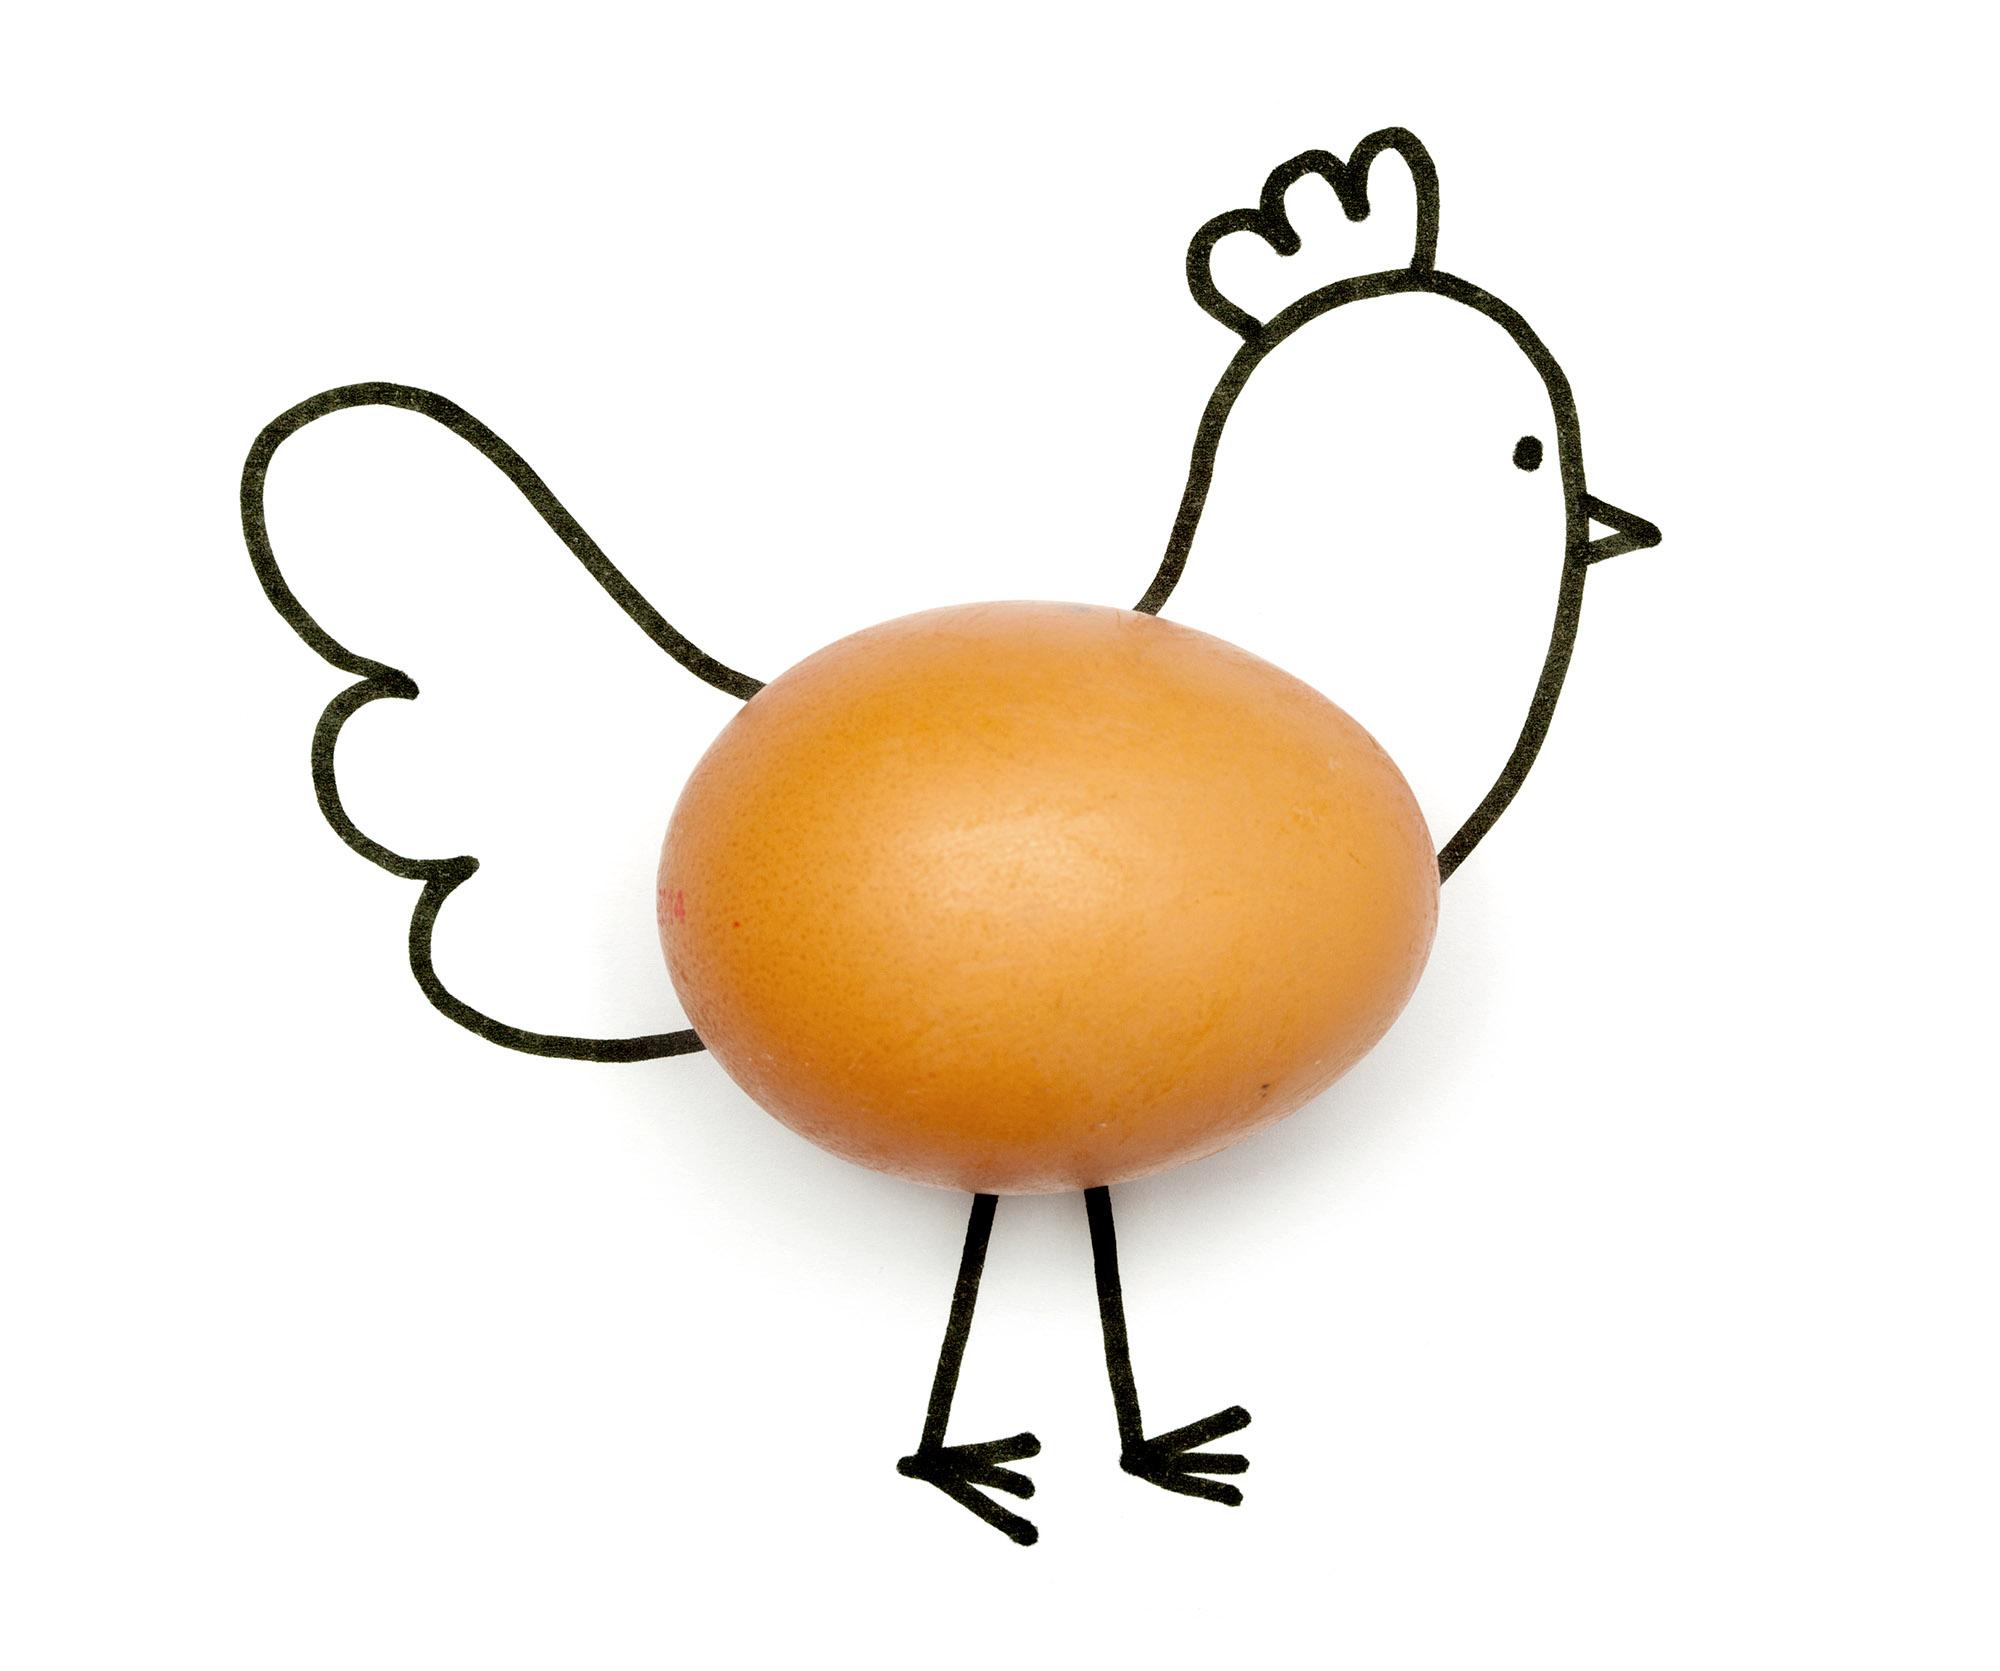 Drawing and Object: Chicken & Egg